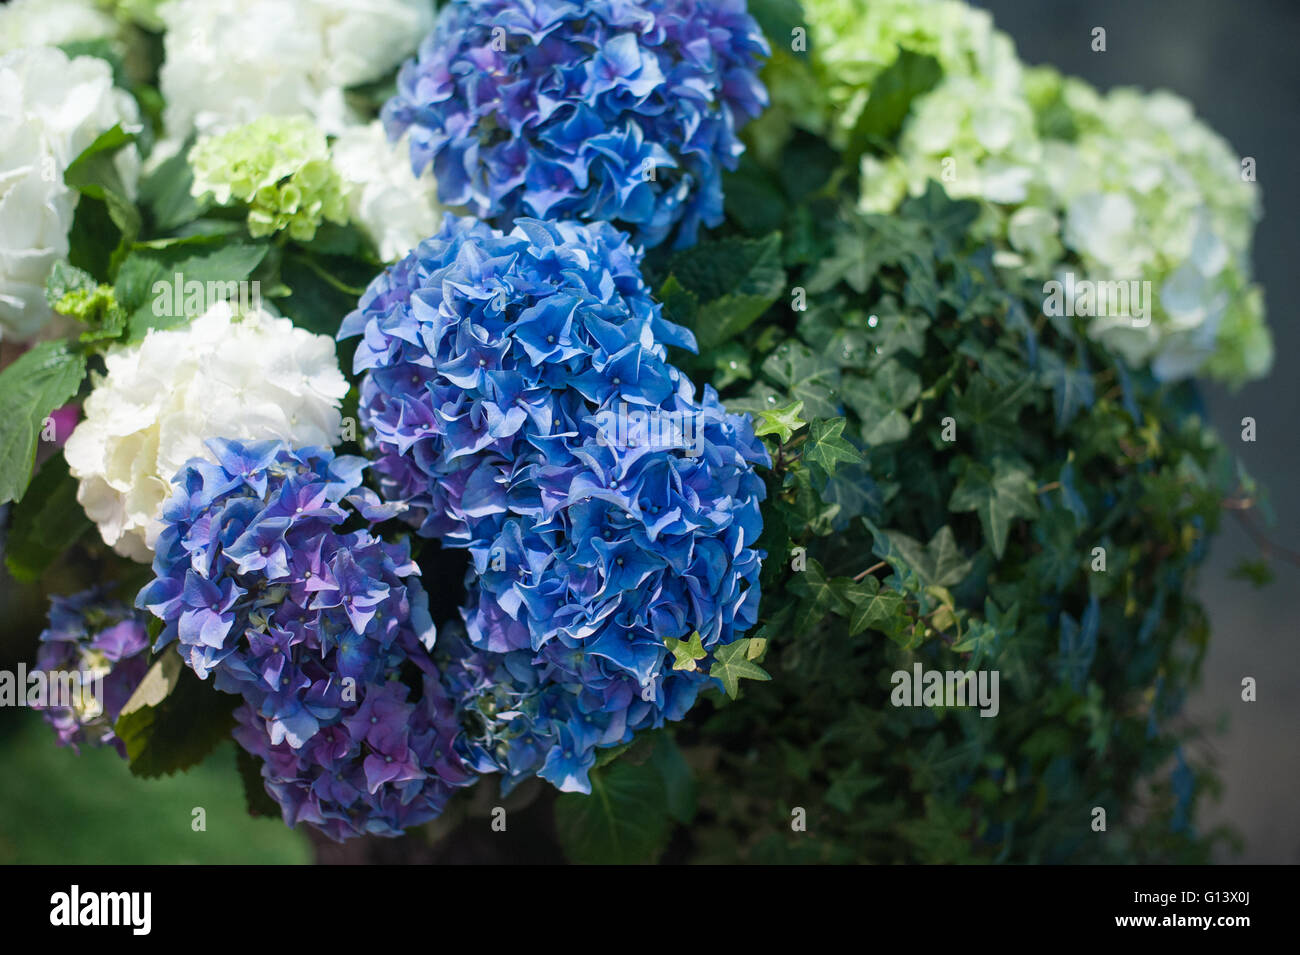 Blue hydrangea blossom with green leaves in spring garden Stock Photo